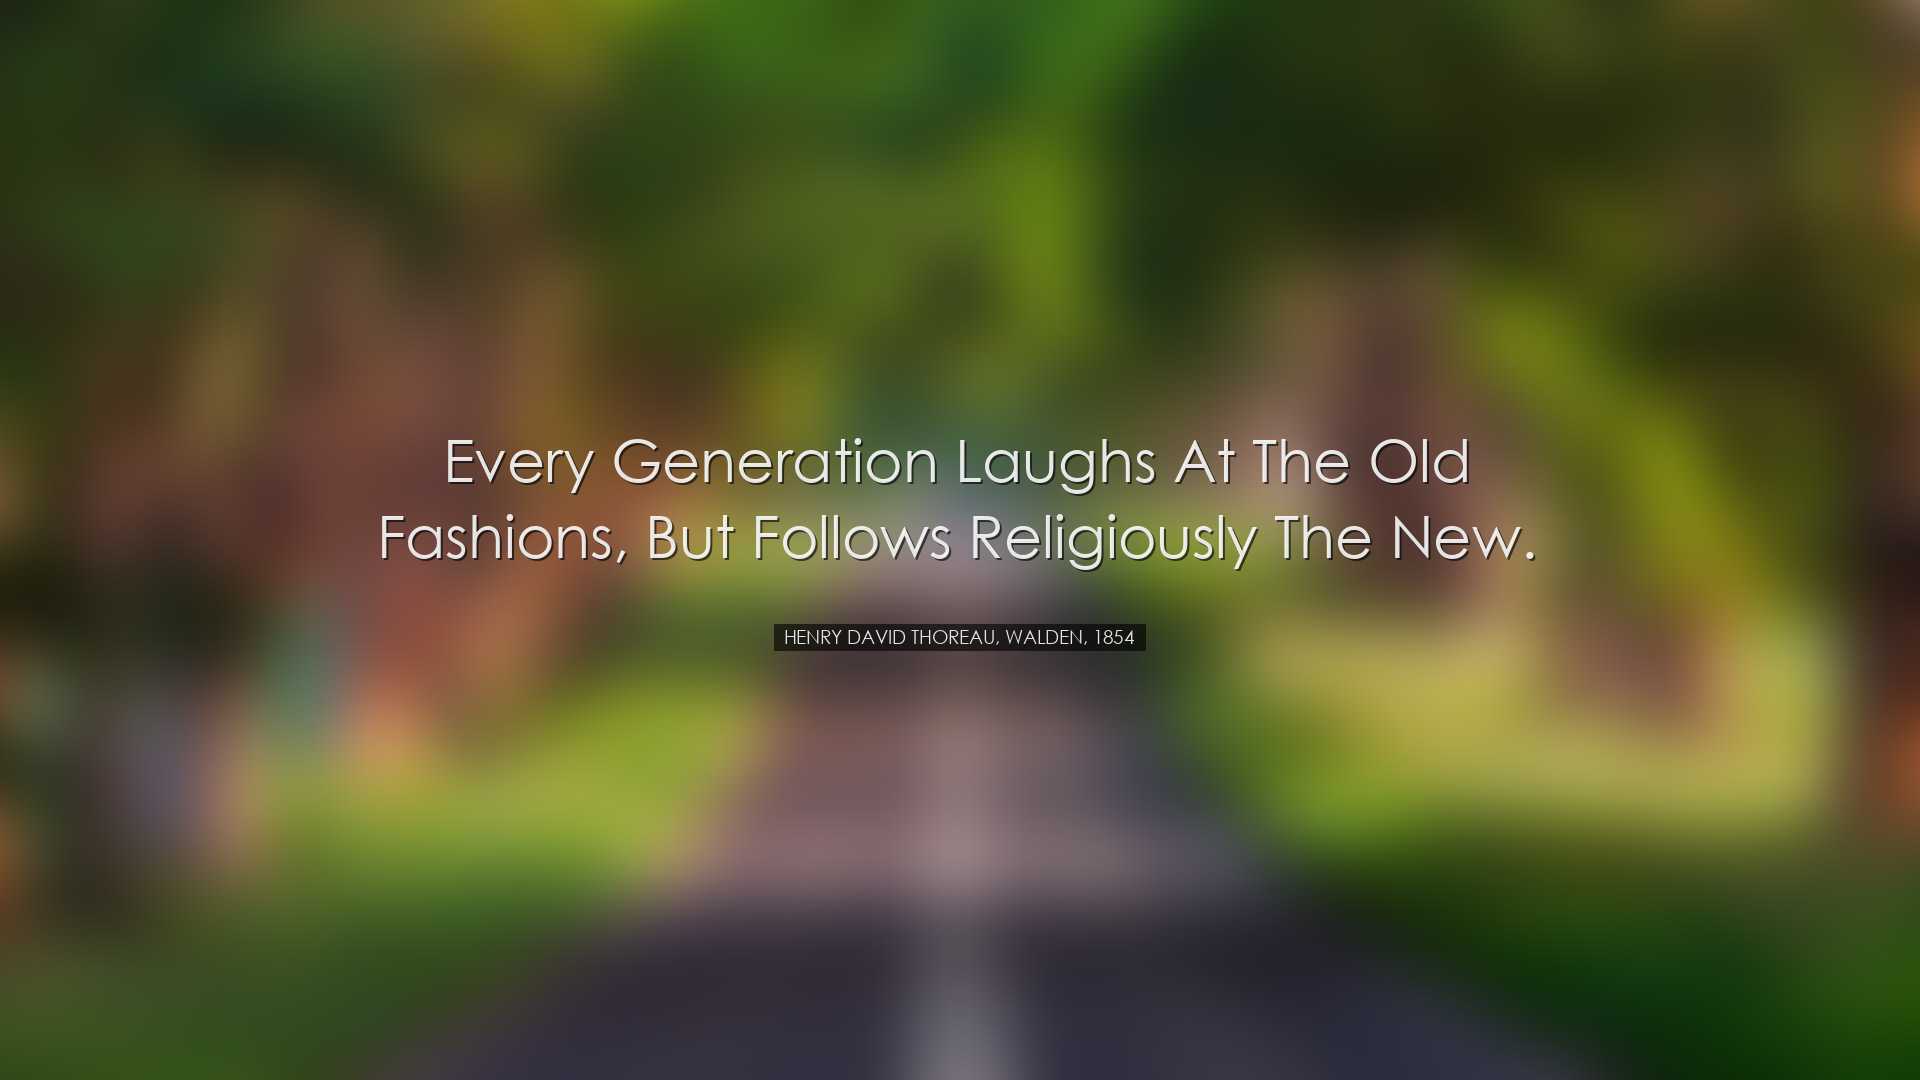 Every generation laughs at the old fashions, but follows religious